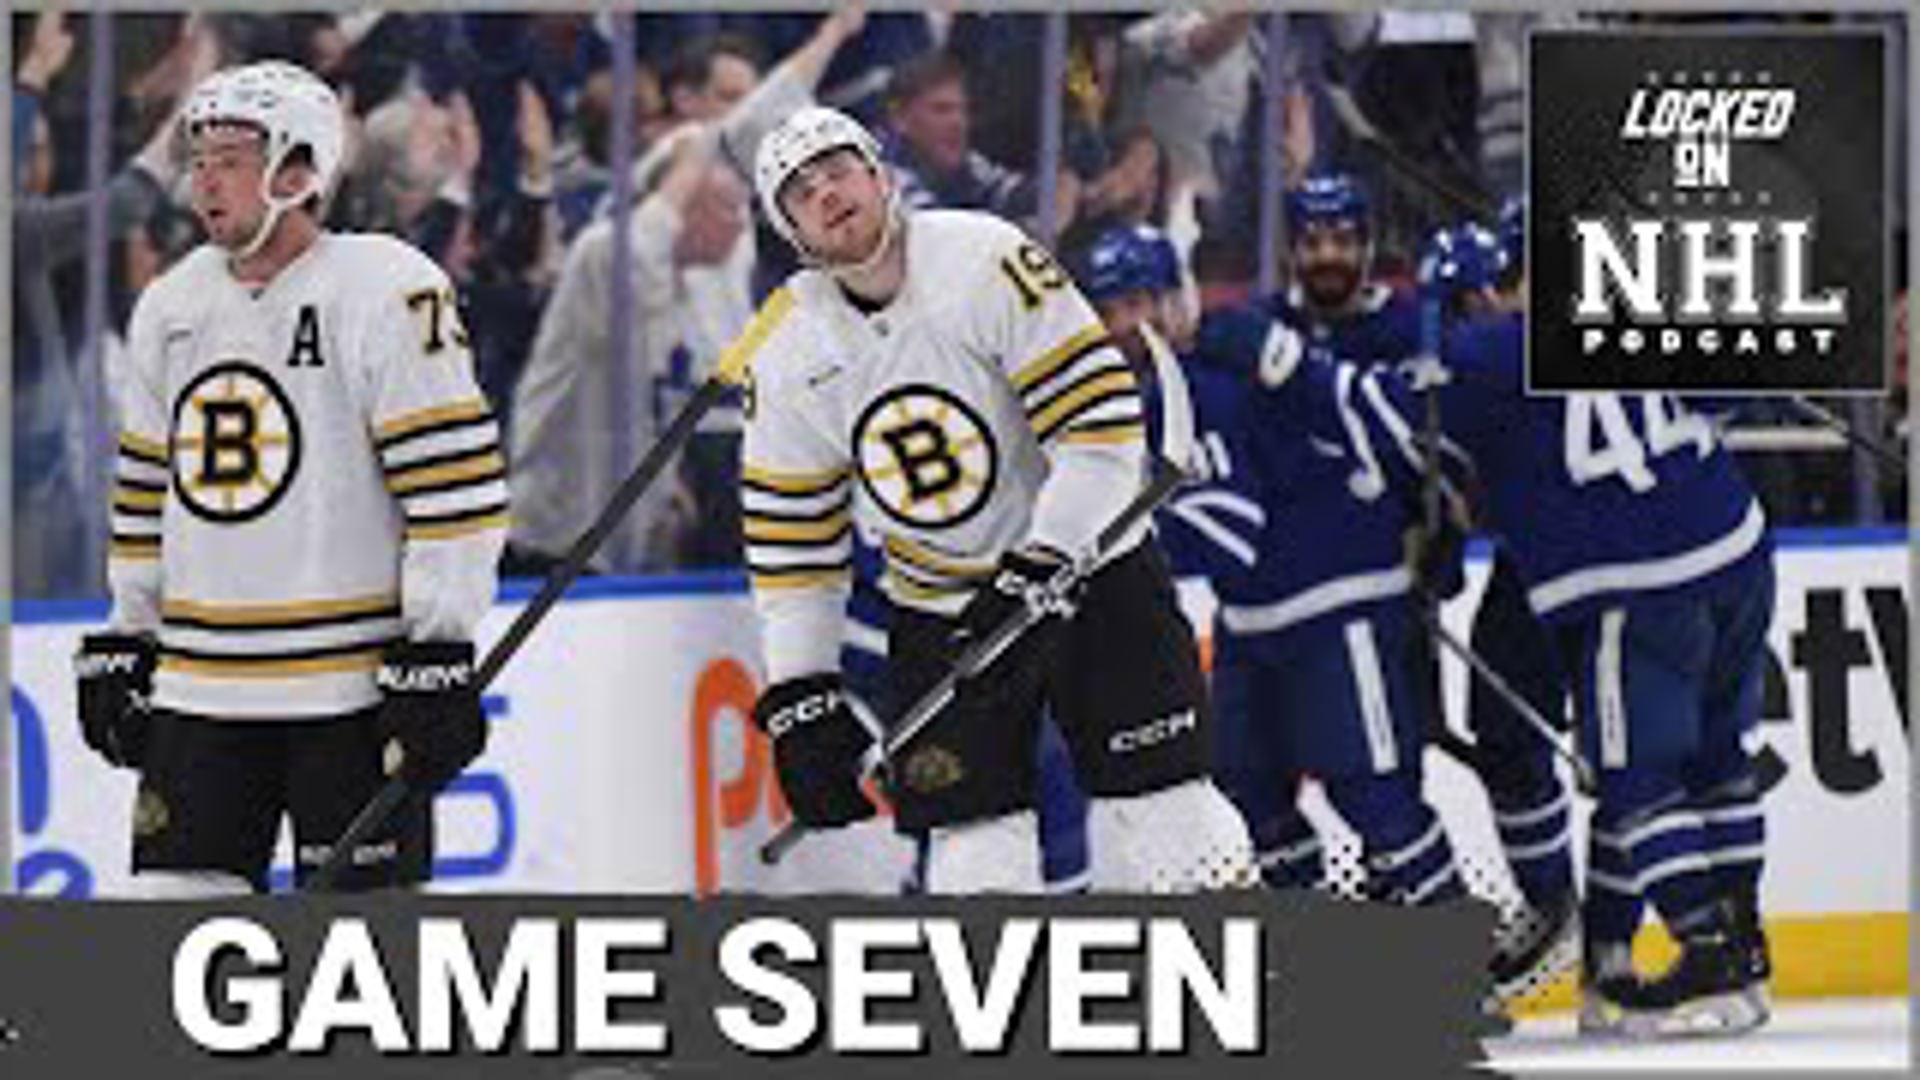 Round 1 of the Stanley Cup Playoffs will wrap up this weekend and the three remaining series are extremely exciting. The Bruins and Maple Leafs had a game 7.